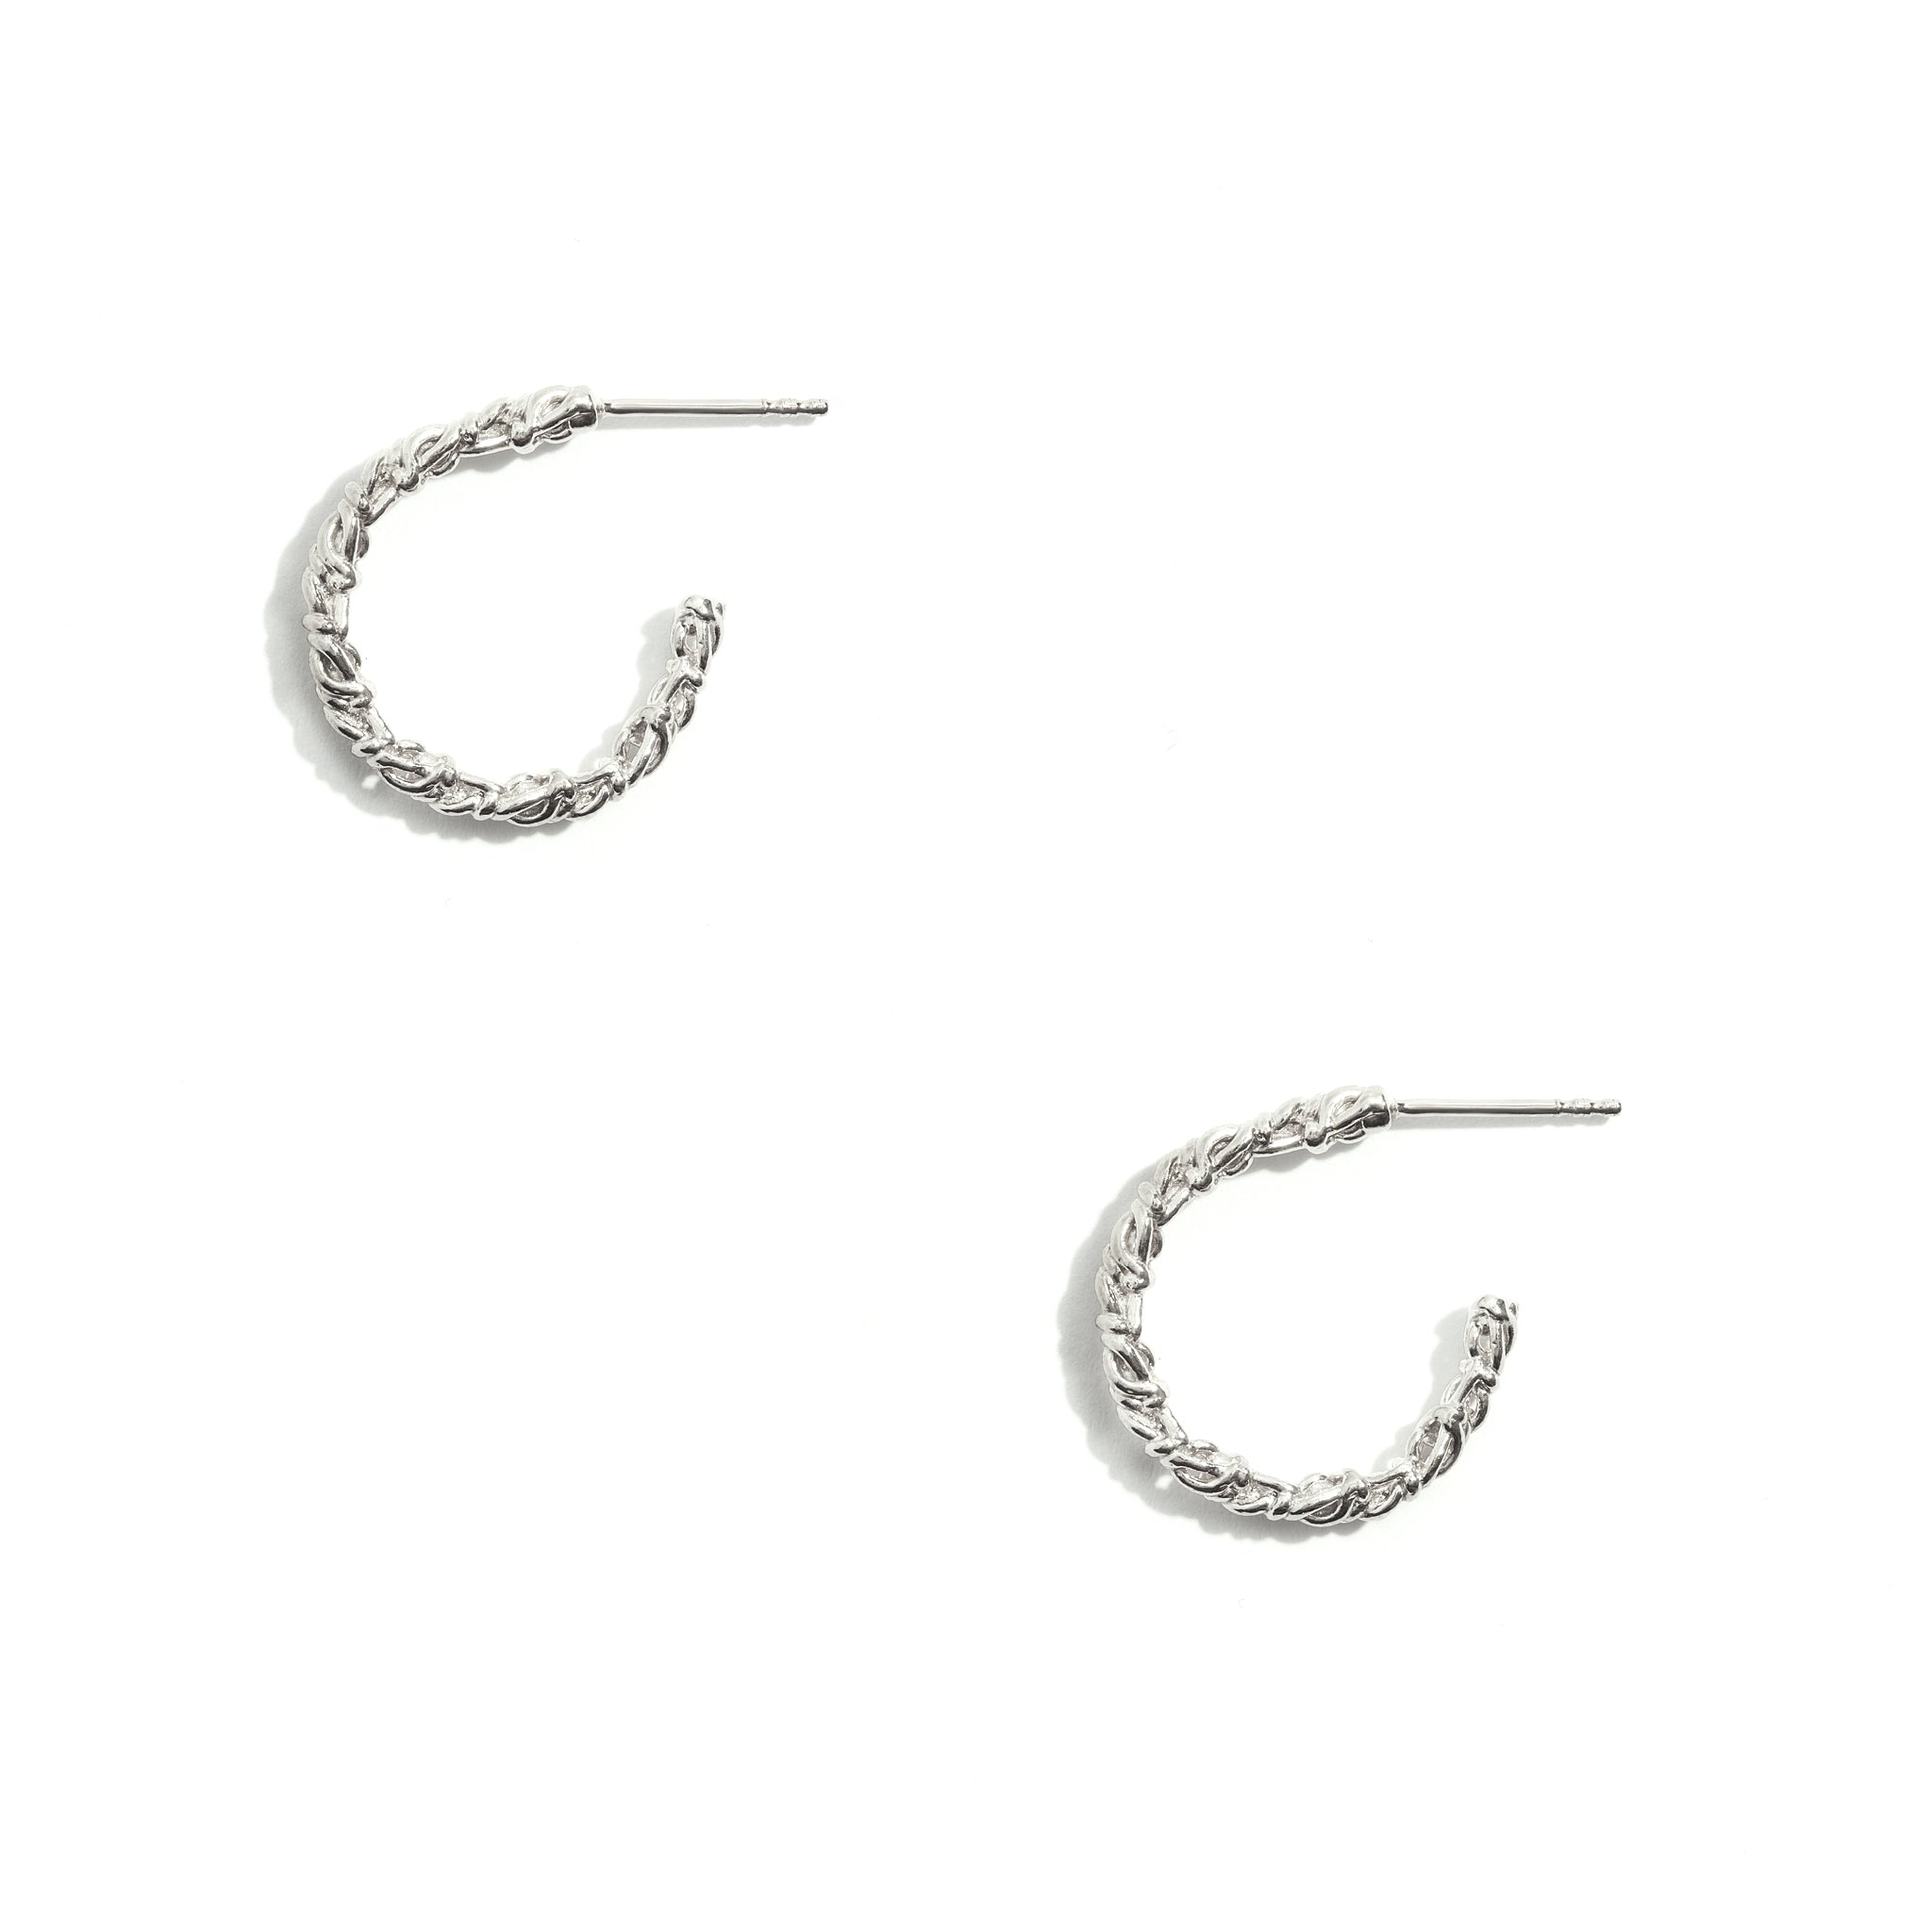 Silver Open Hoop Chain Earrings crafted from 925 silver, offering elegance and contemporary style